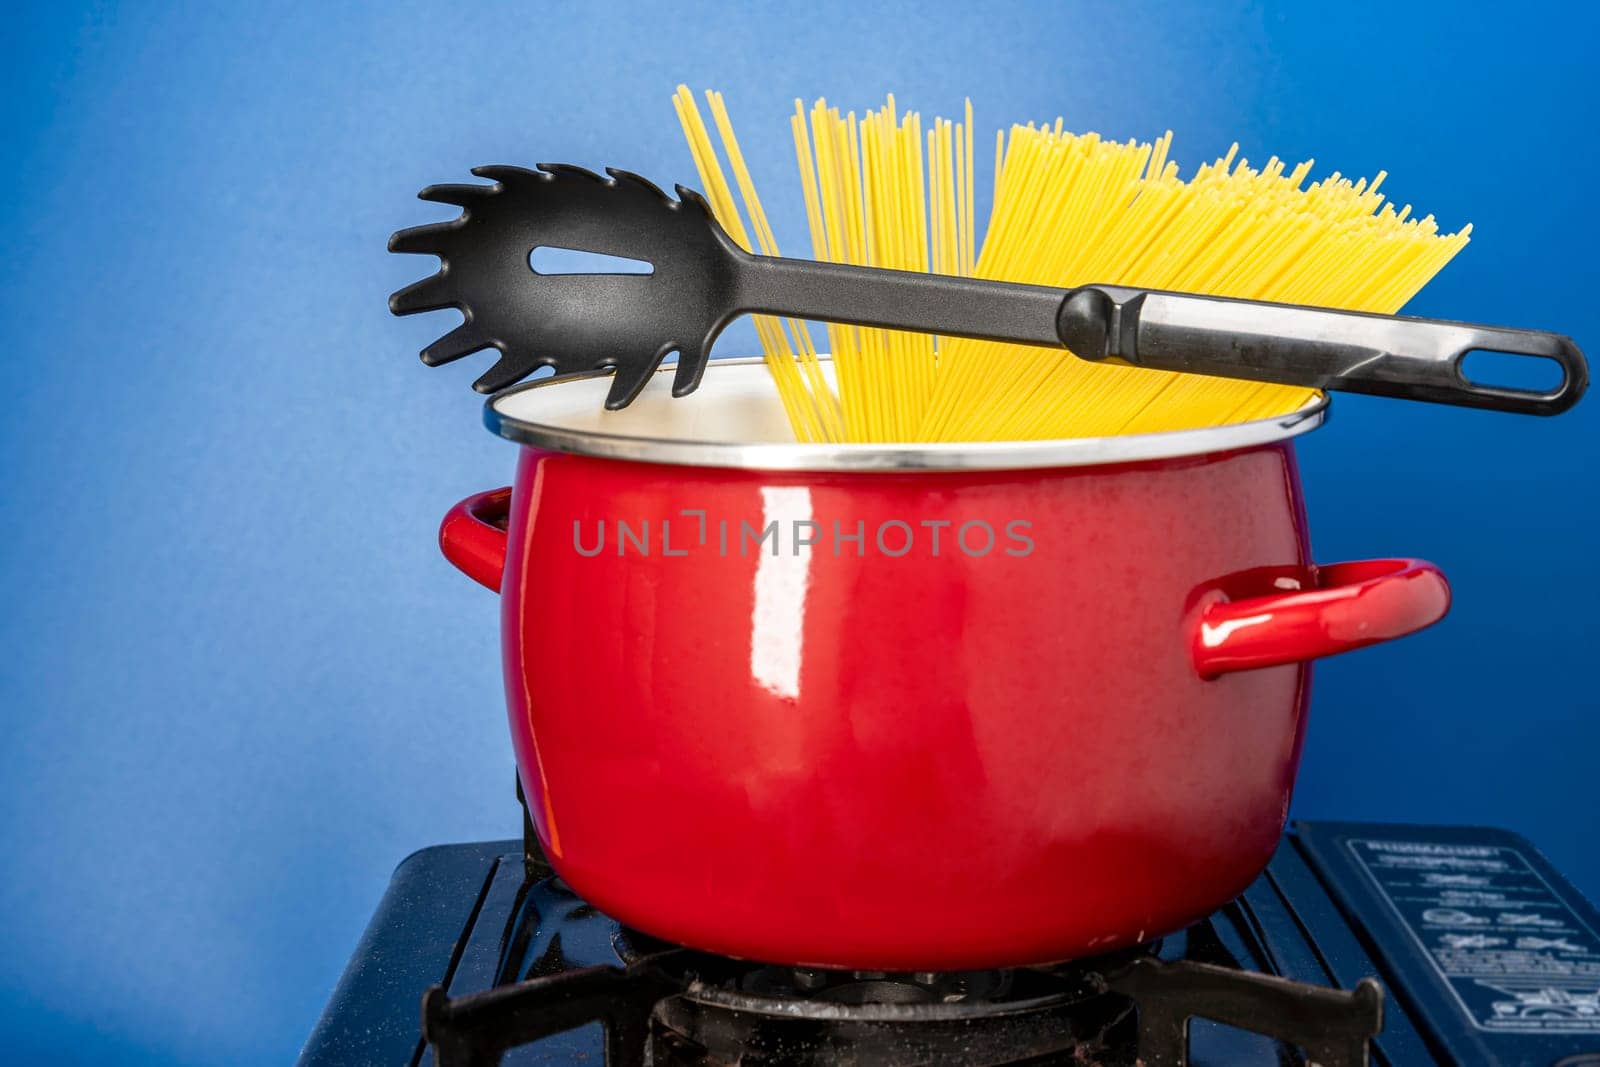 recipe. we cook ourselves. spaghetti in a saucepan. a beautiful red saucepan with spaghetti and skimmer. cooking spaghetti in a saucepan on a gas stove. homemade Italian-style dinner. kitchen saucepan on a blue background